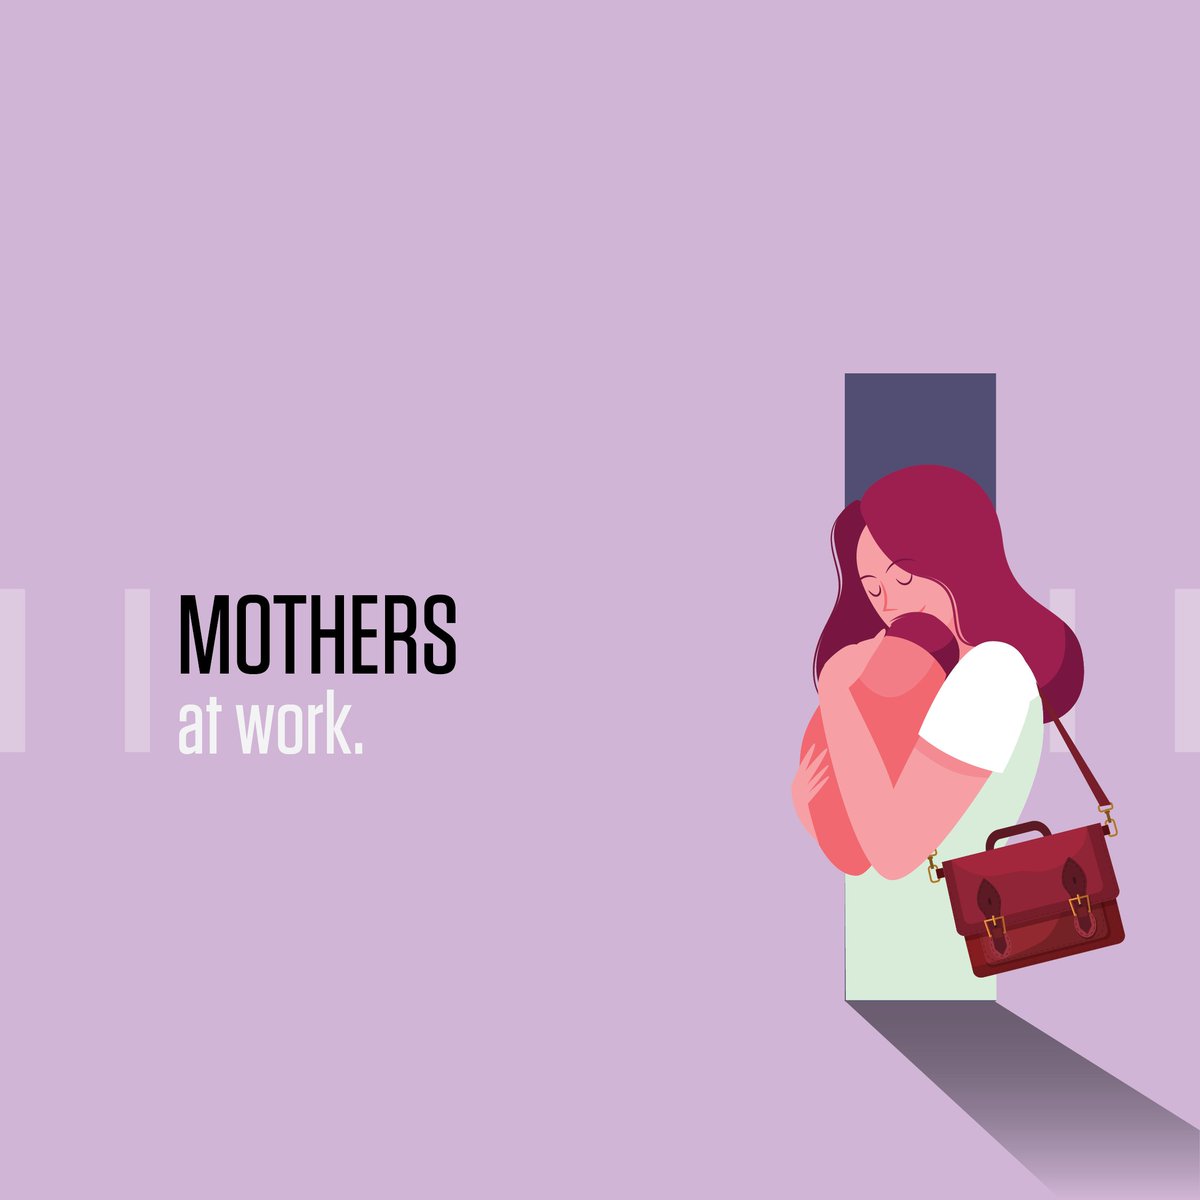 At Infosys, we believe that mothers are valuable to our workforce. We have a post - maternity program to ensure that we encourage our employees who are mothers, to come back to work. #InfosysESG #ESGIsAnOpportunity